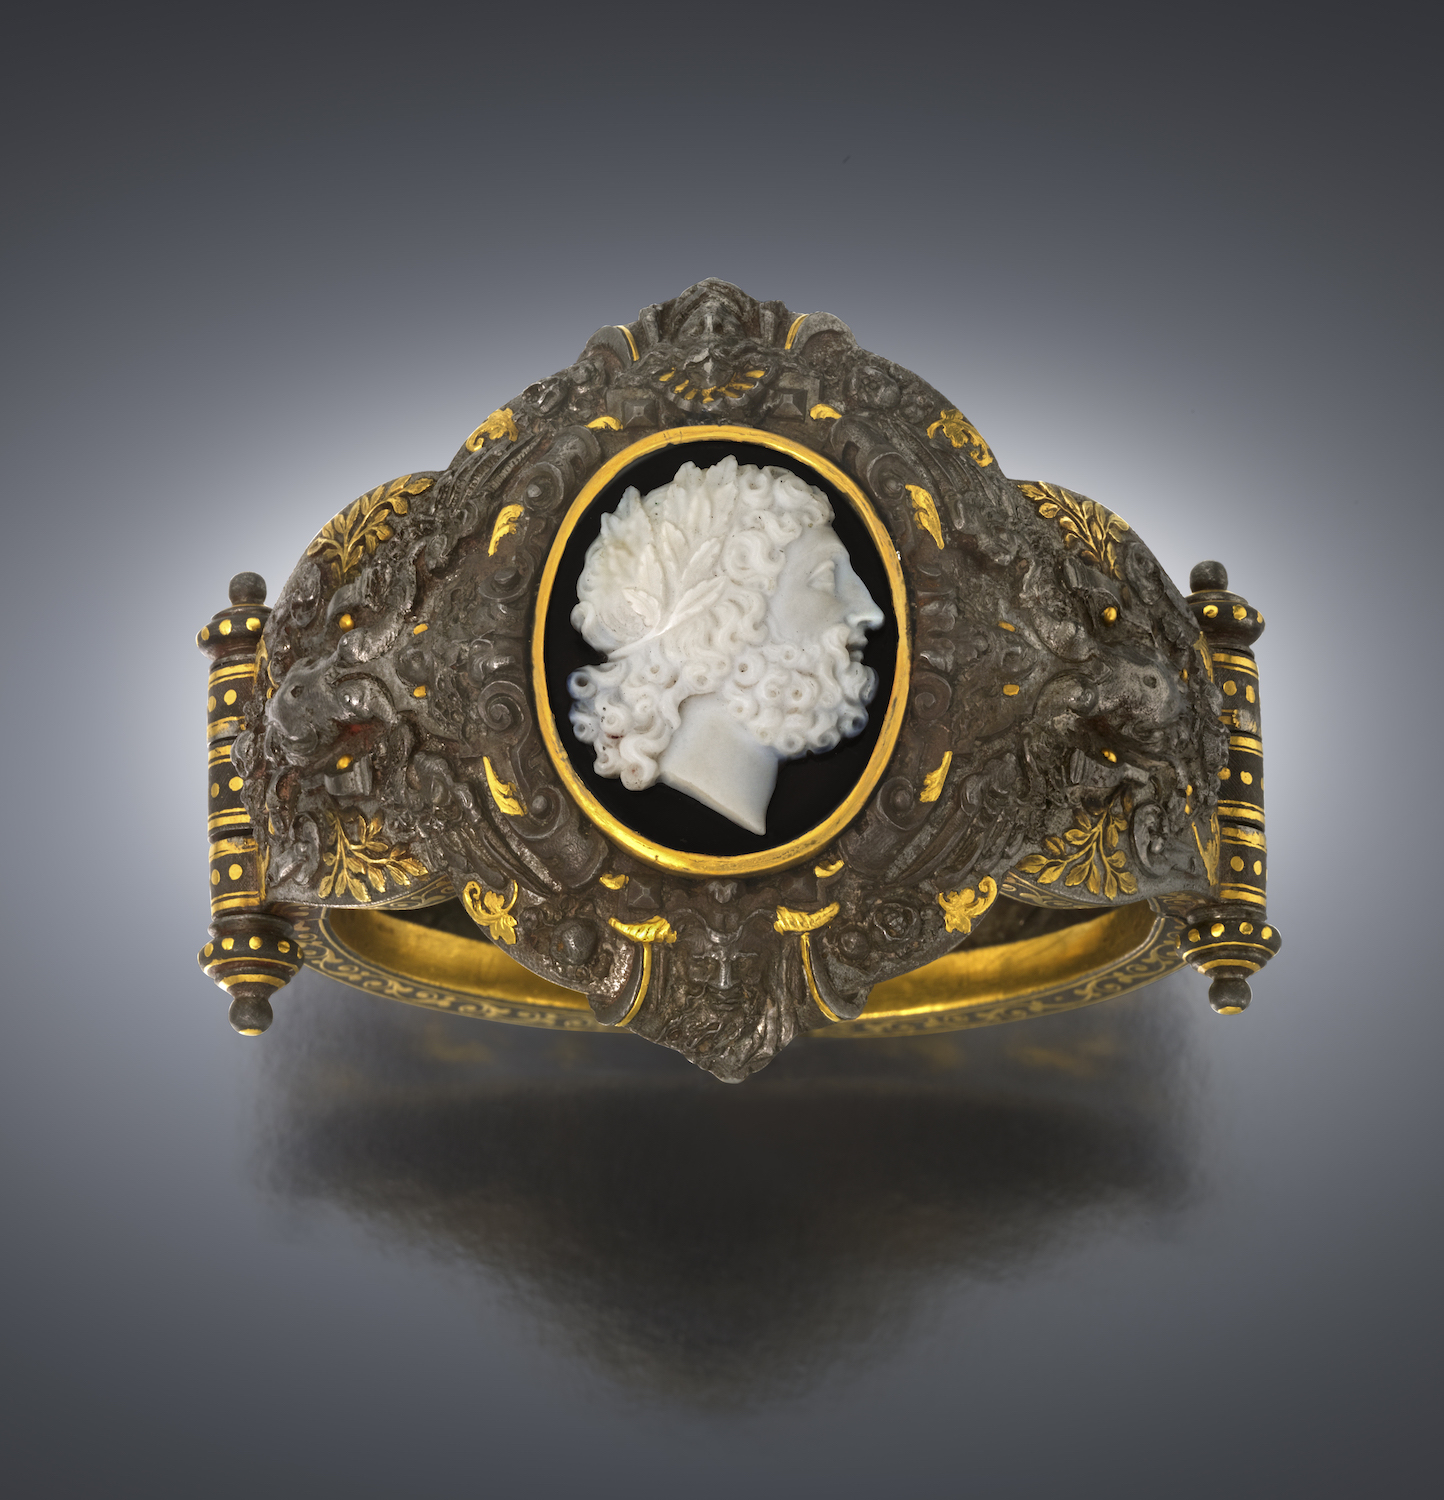 Boucheron “Renaissance Revival” cuff / bracelet, attributed to a design by Paul Legrand and made by Tissot, highly sculptural gold inlay, damascene steel set with an intricately agate carved cameo c. 1878